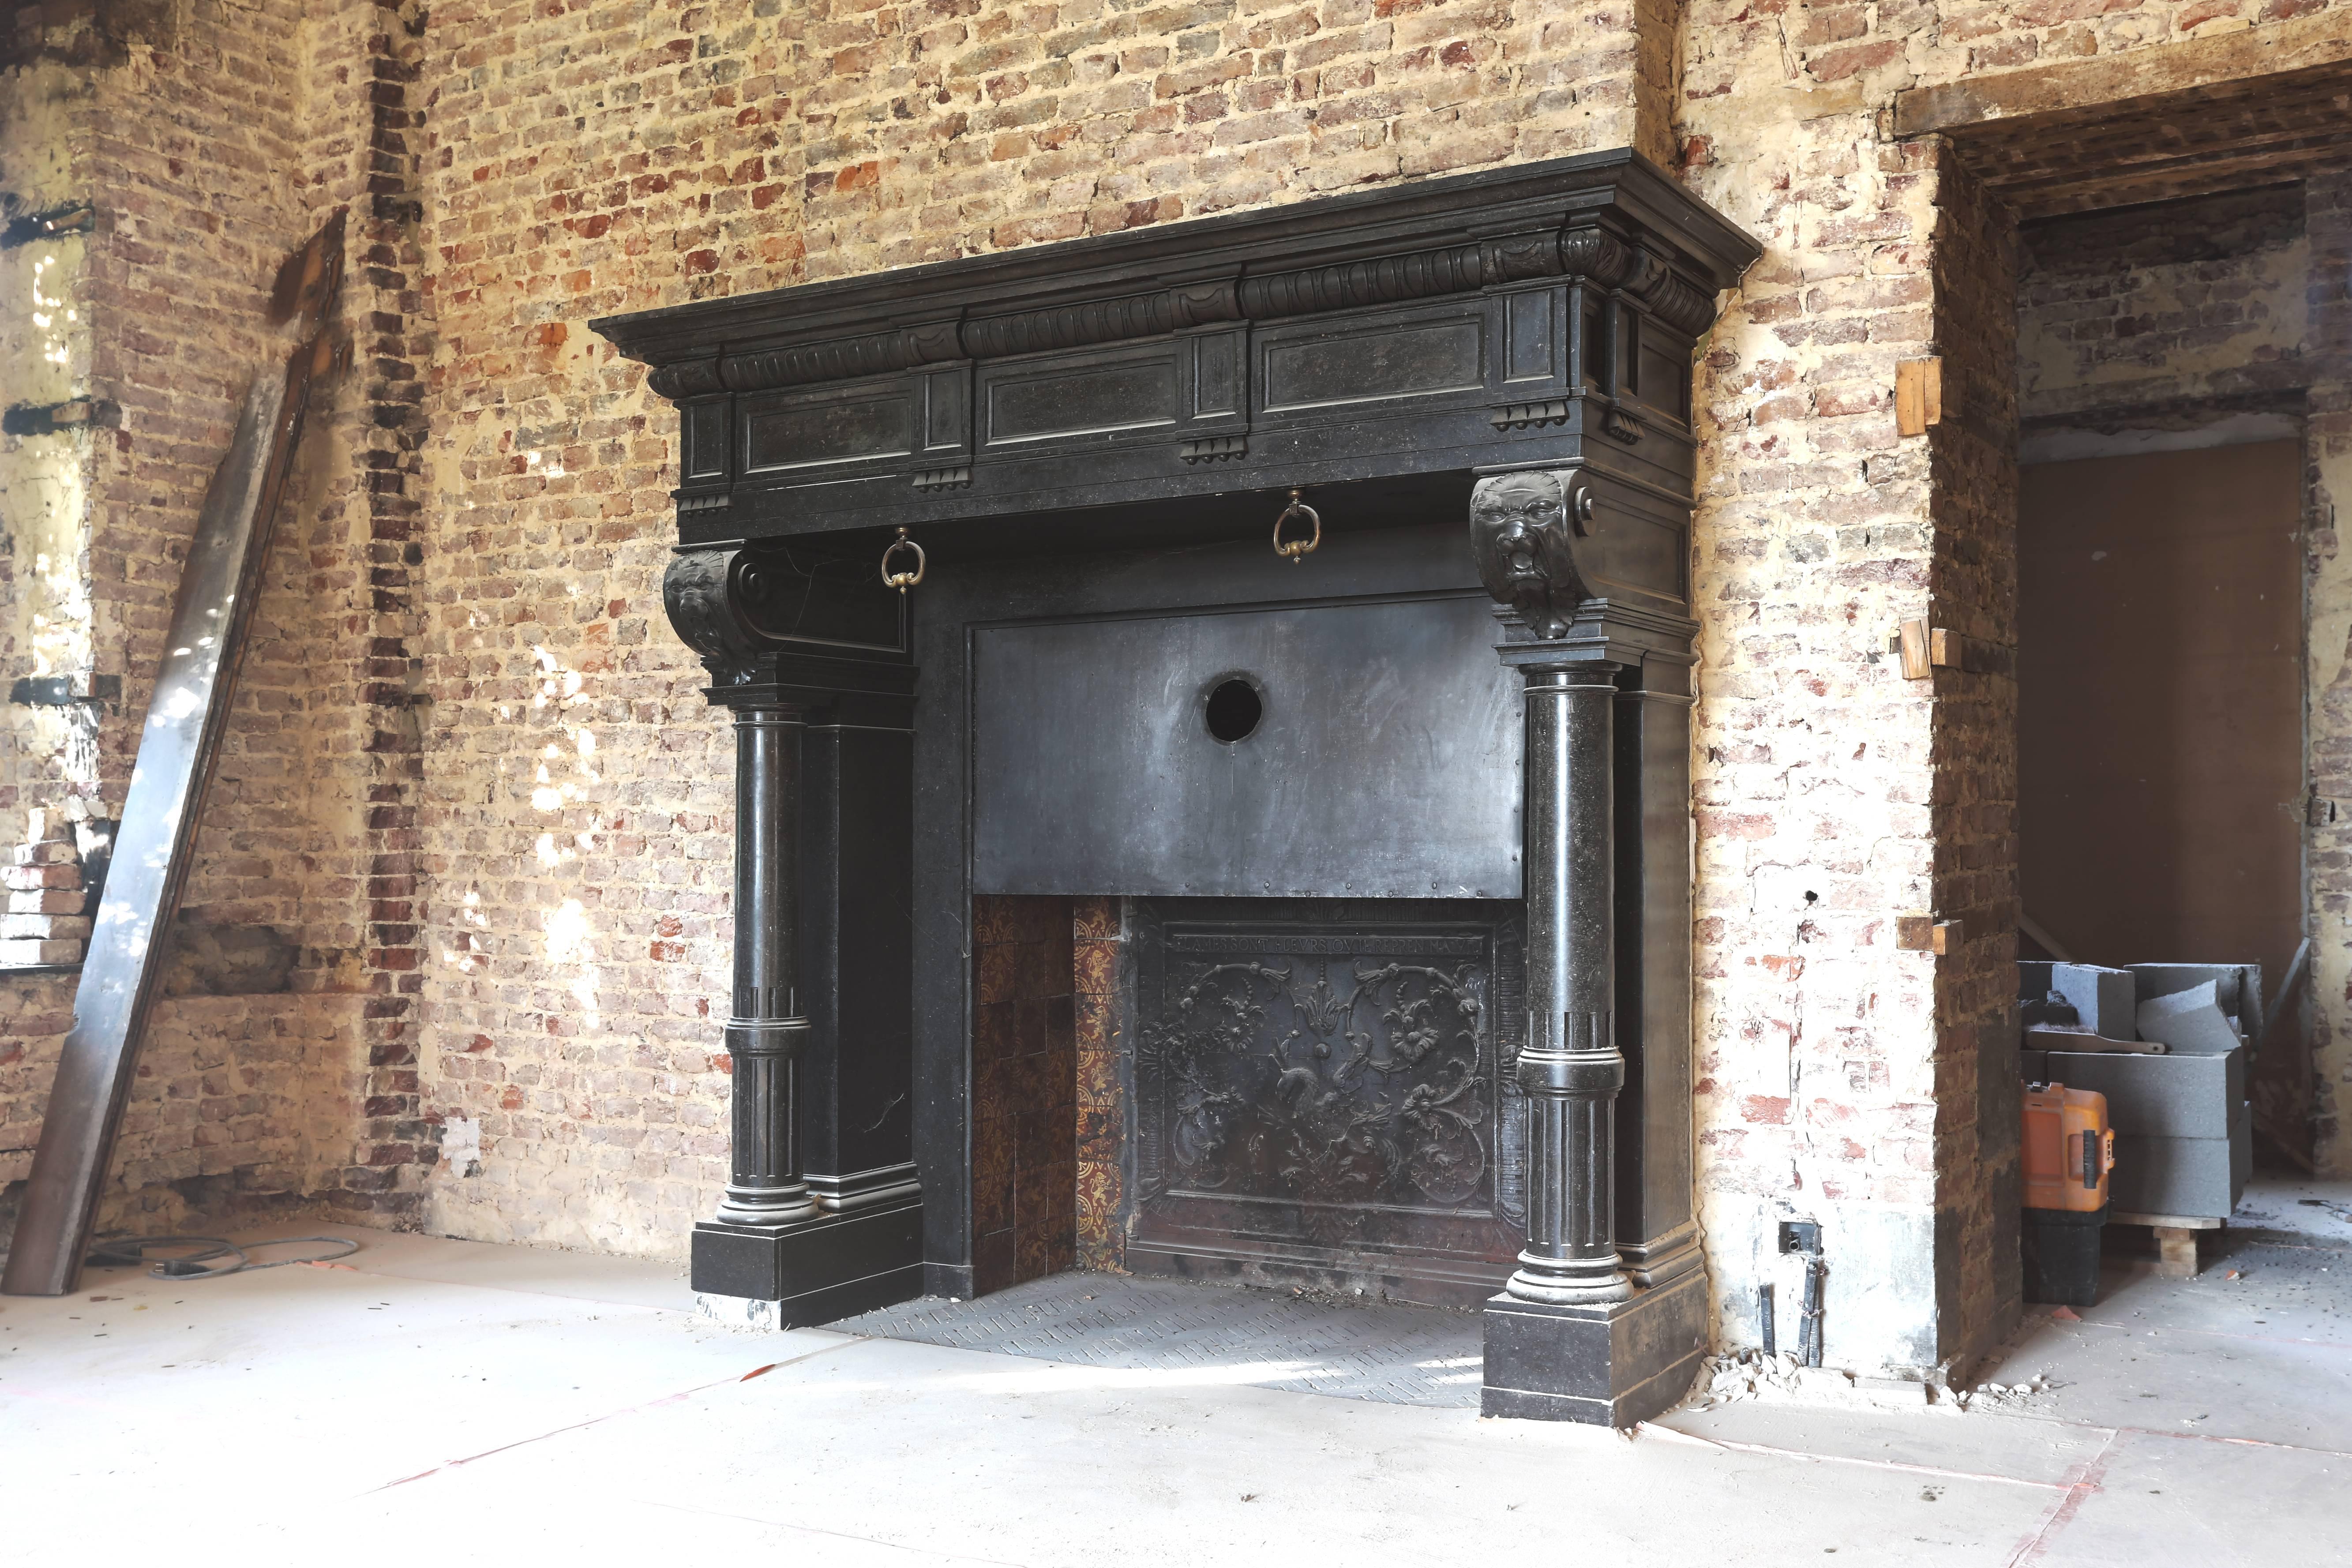 A very unique and exclusive castle fireplace of black marble. The provenance of this antique fireplace is Chateau de Doyon in the neighborhood of Namen (Belgium). This castle is built in 1892. The font part of the fireplace is nicely decorated with